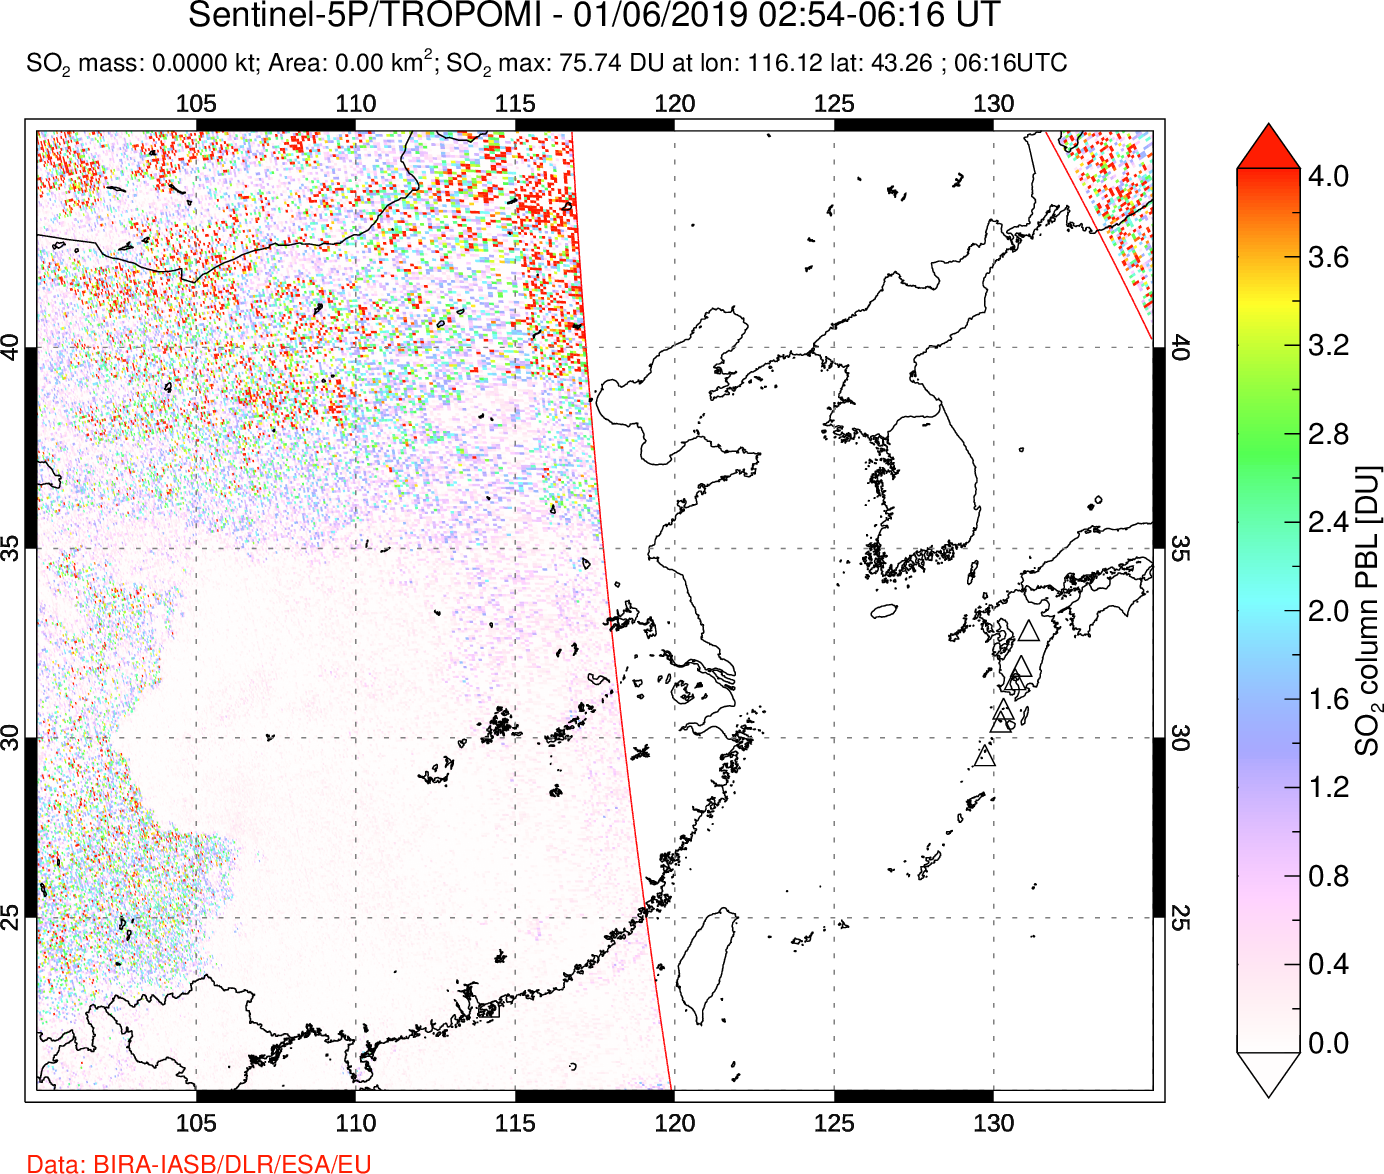 A sulfur dioxide image over Eastern China on Jan 06, 2019.